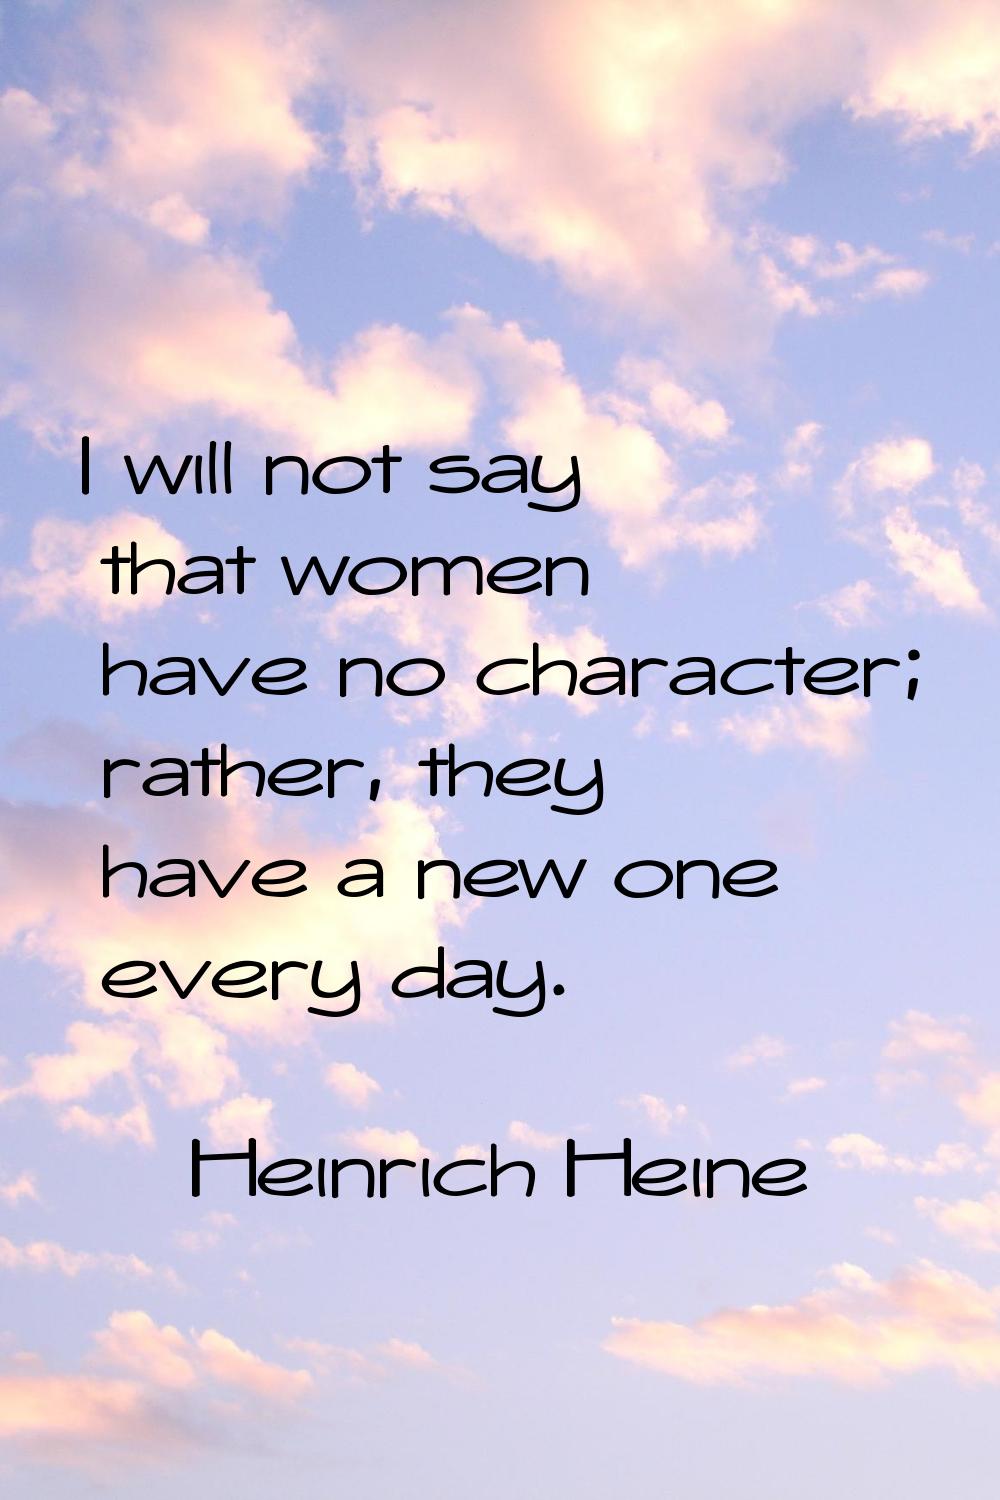 I will not say that women have no character; rather, they have a new one every day.